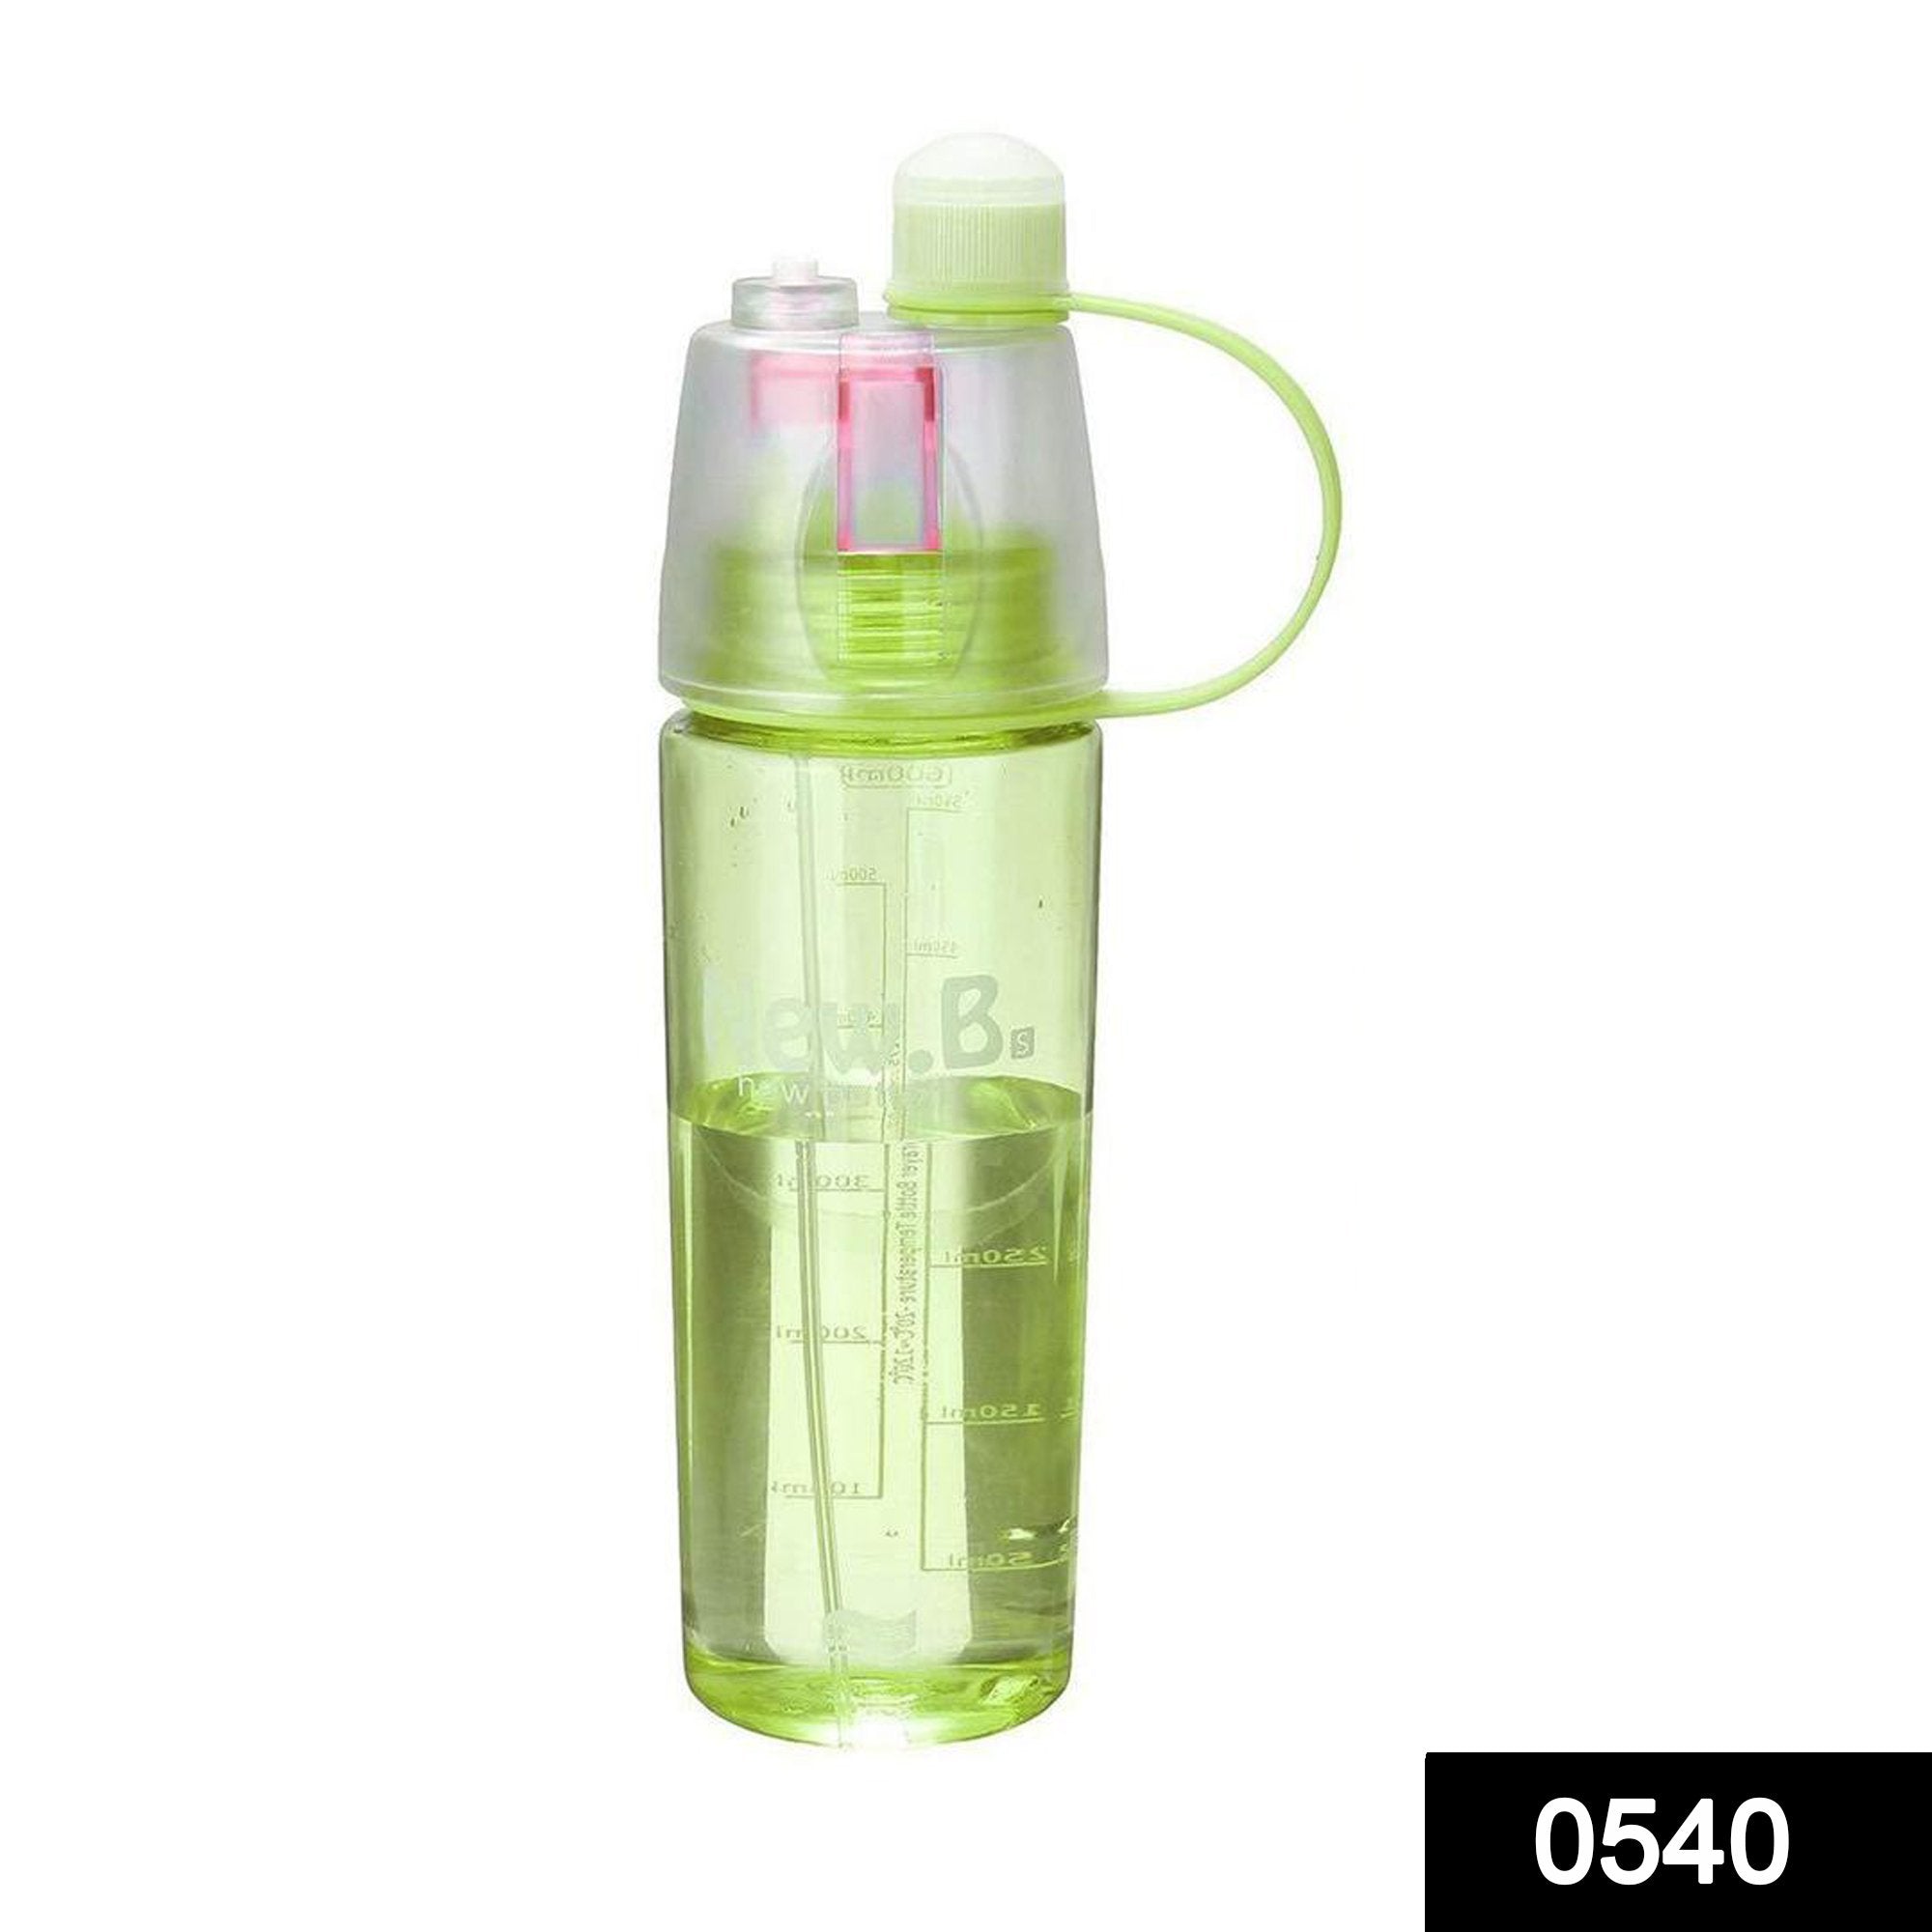 0540 New B Portable Water Bottle - SkyShopy